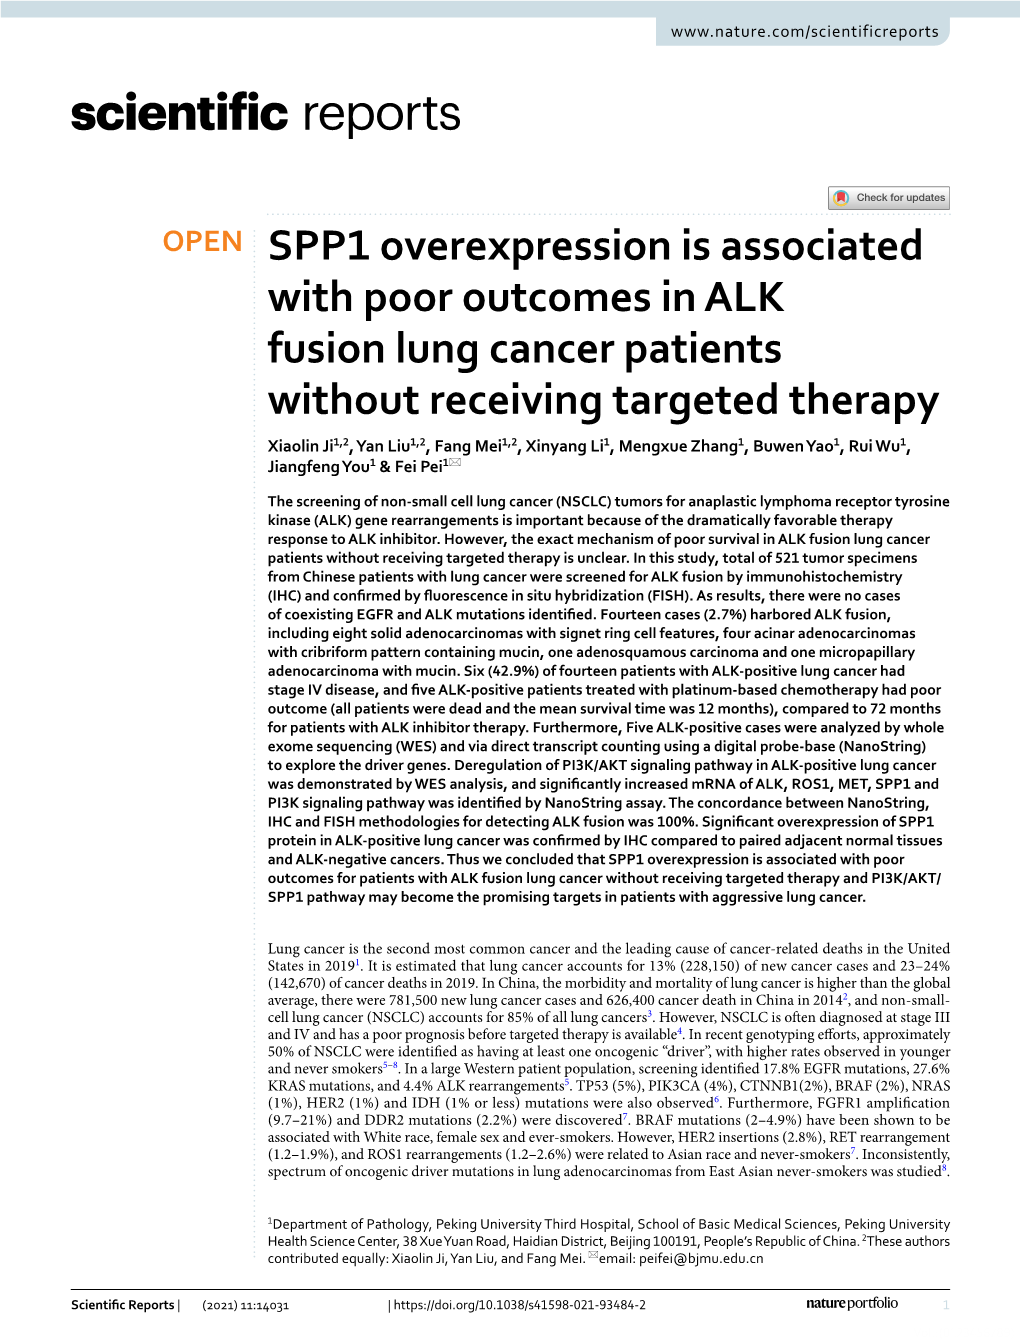 SPP1 Overexpression Is Associated with Poor Outcomes in ALK Fusion